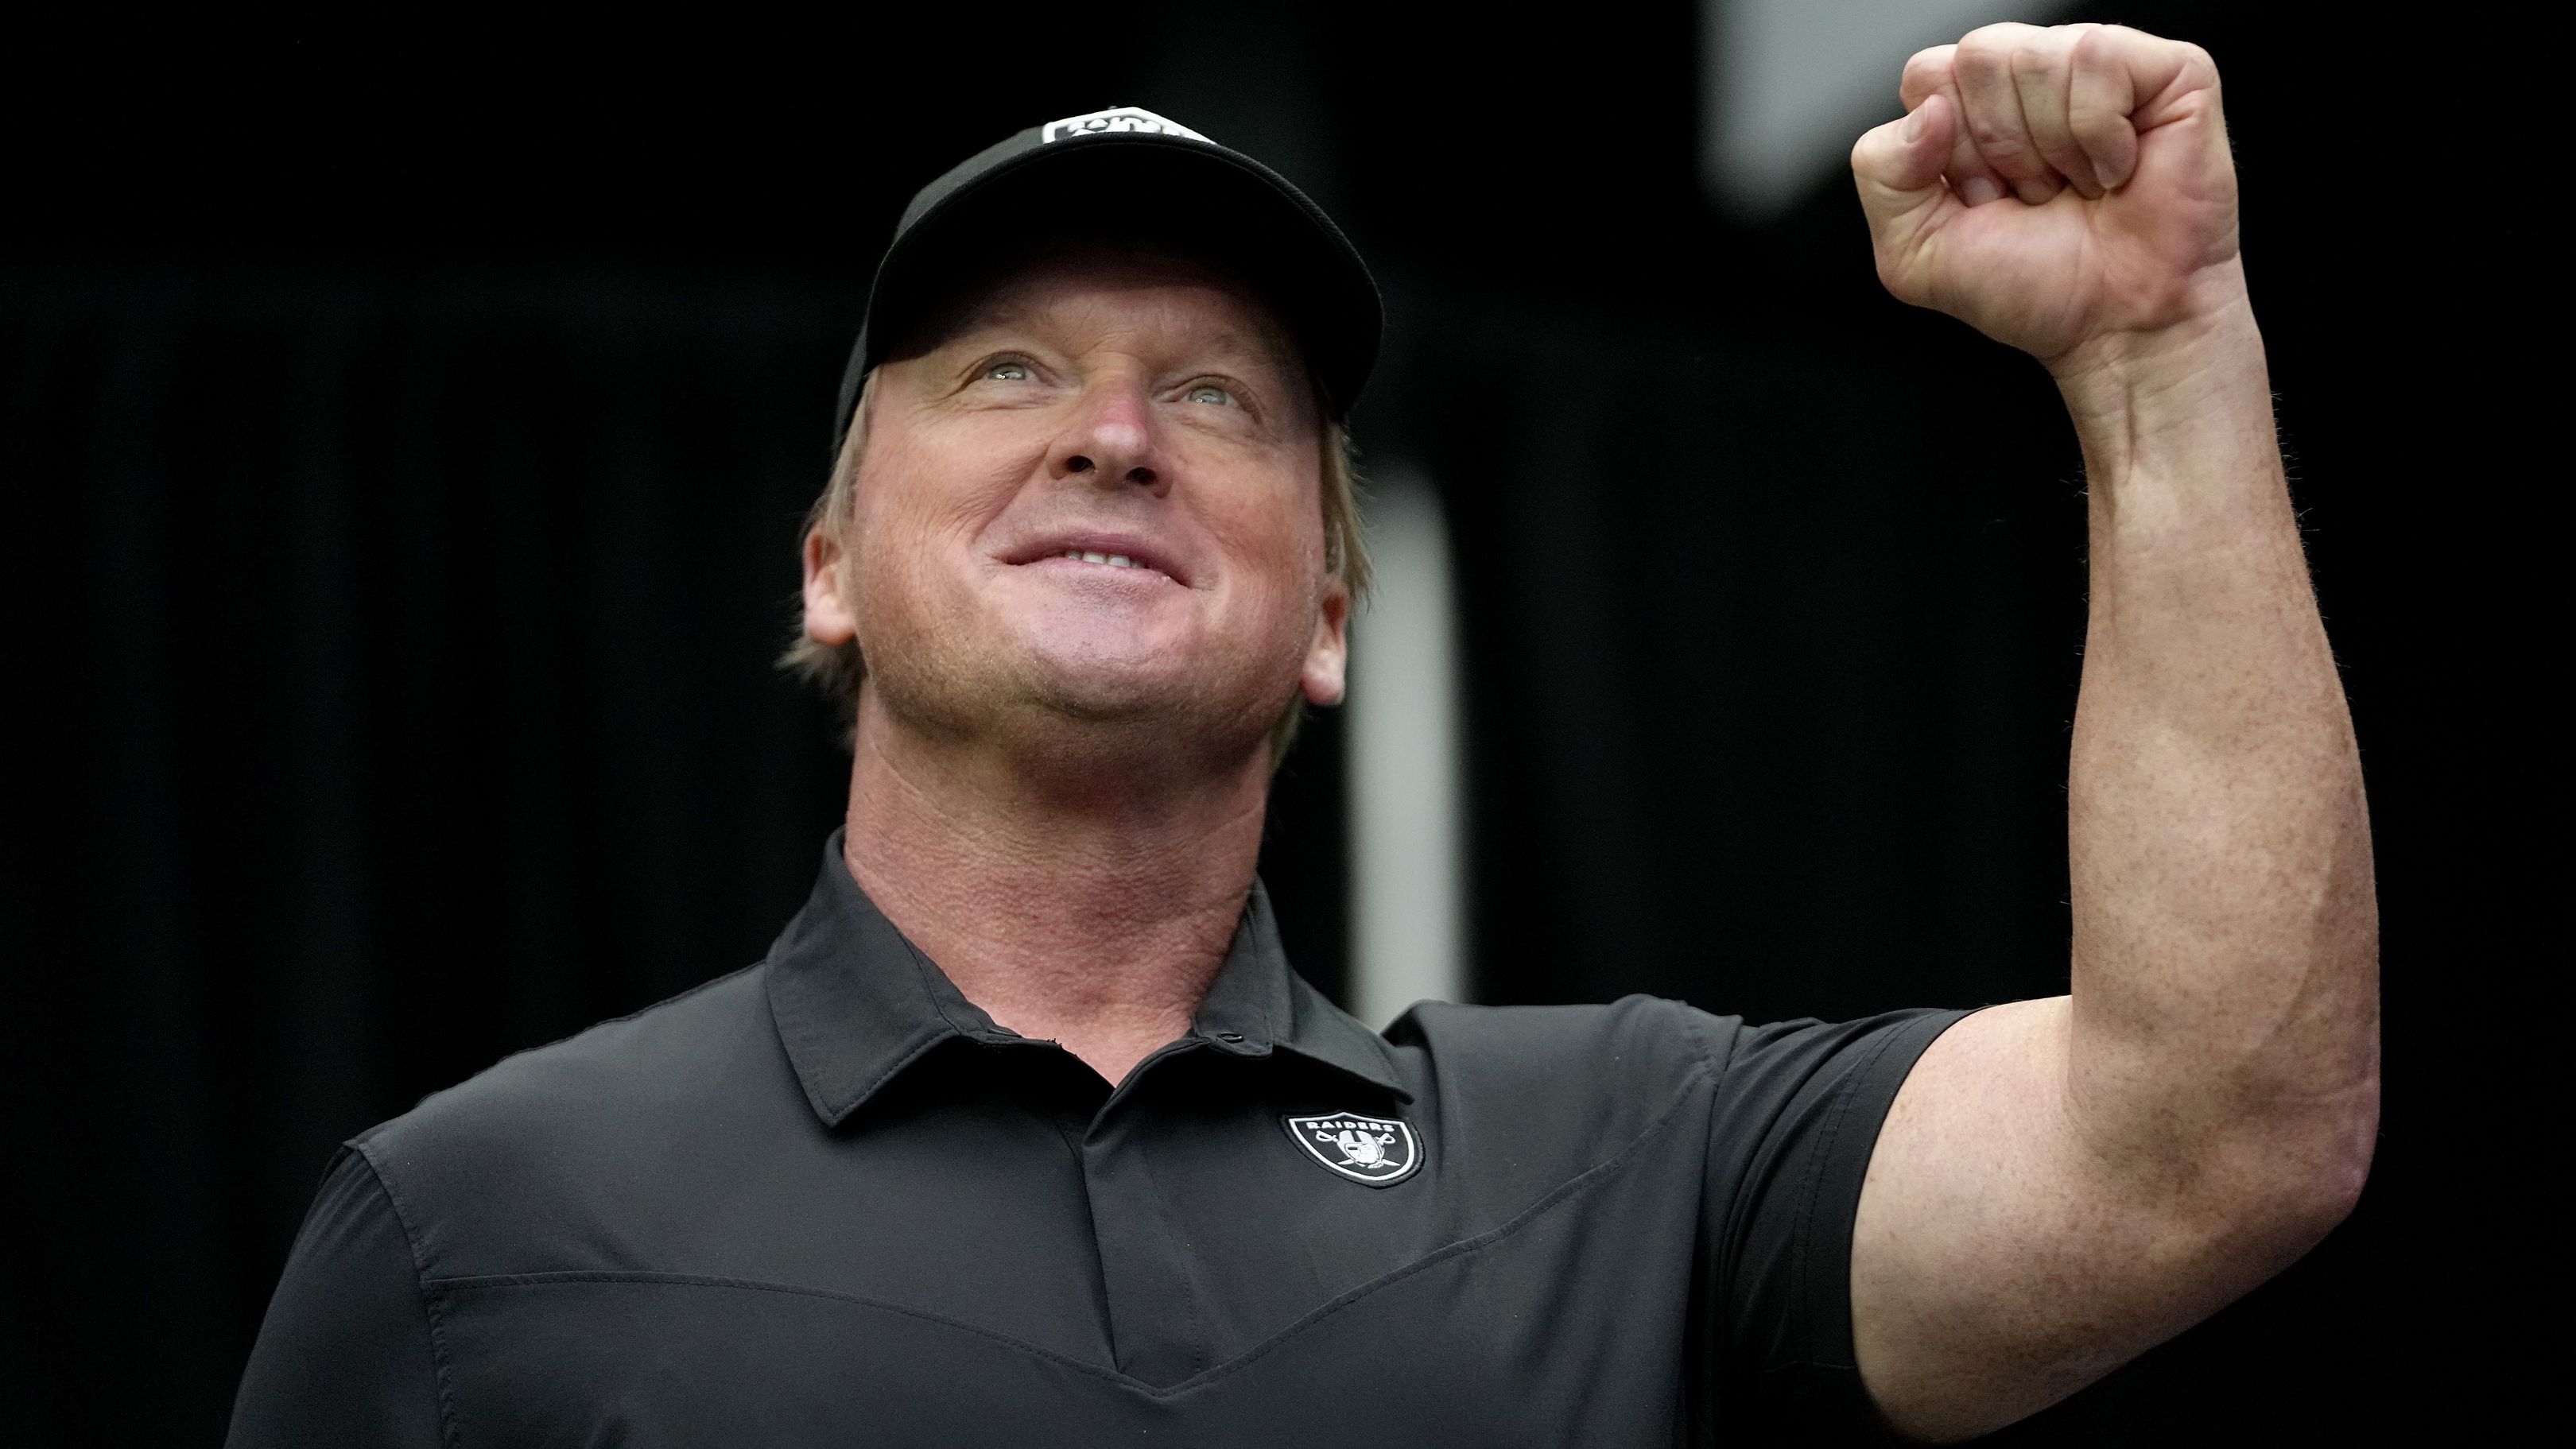 Troubling fact sinks Gruden's decaying image